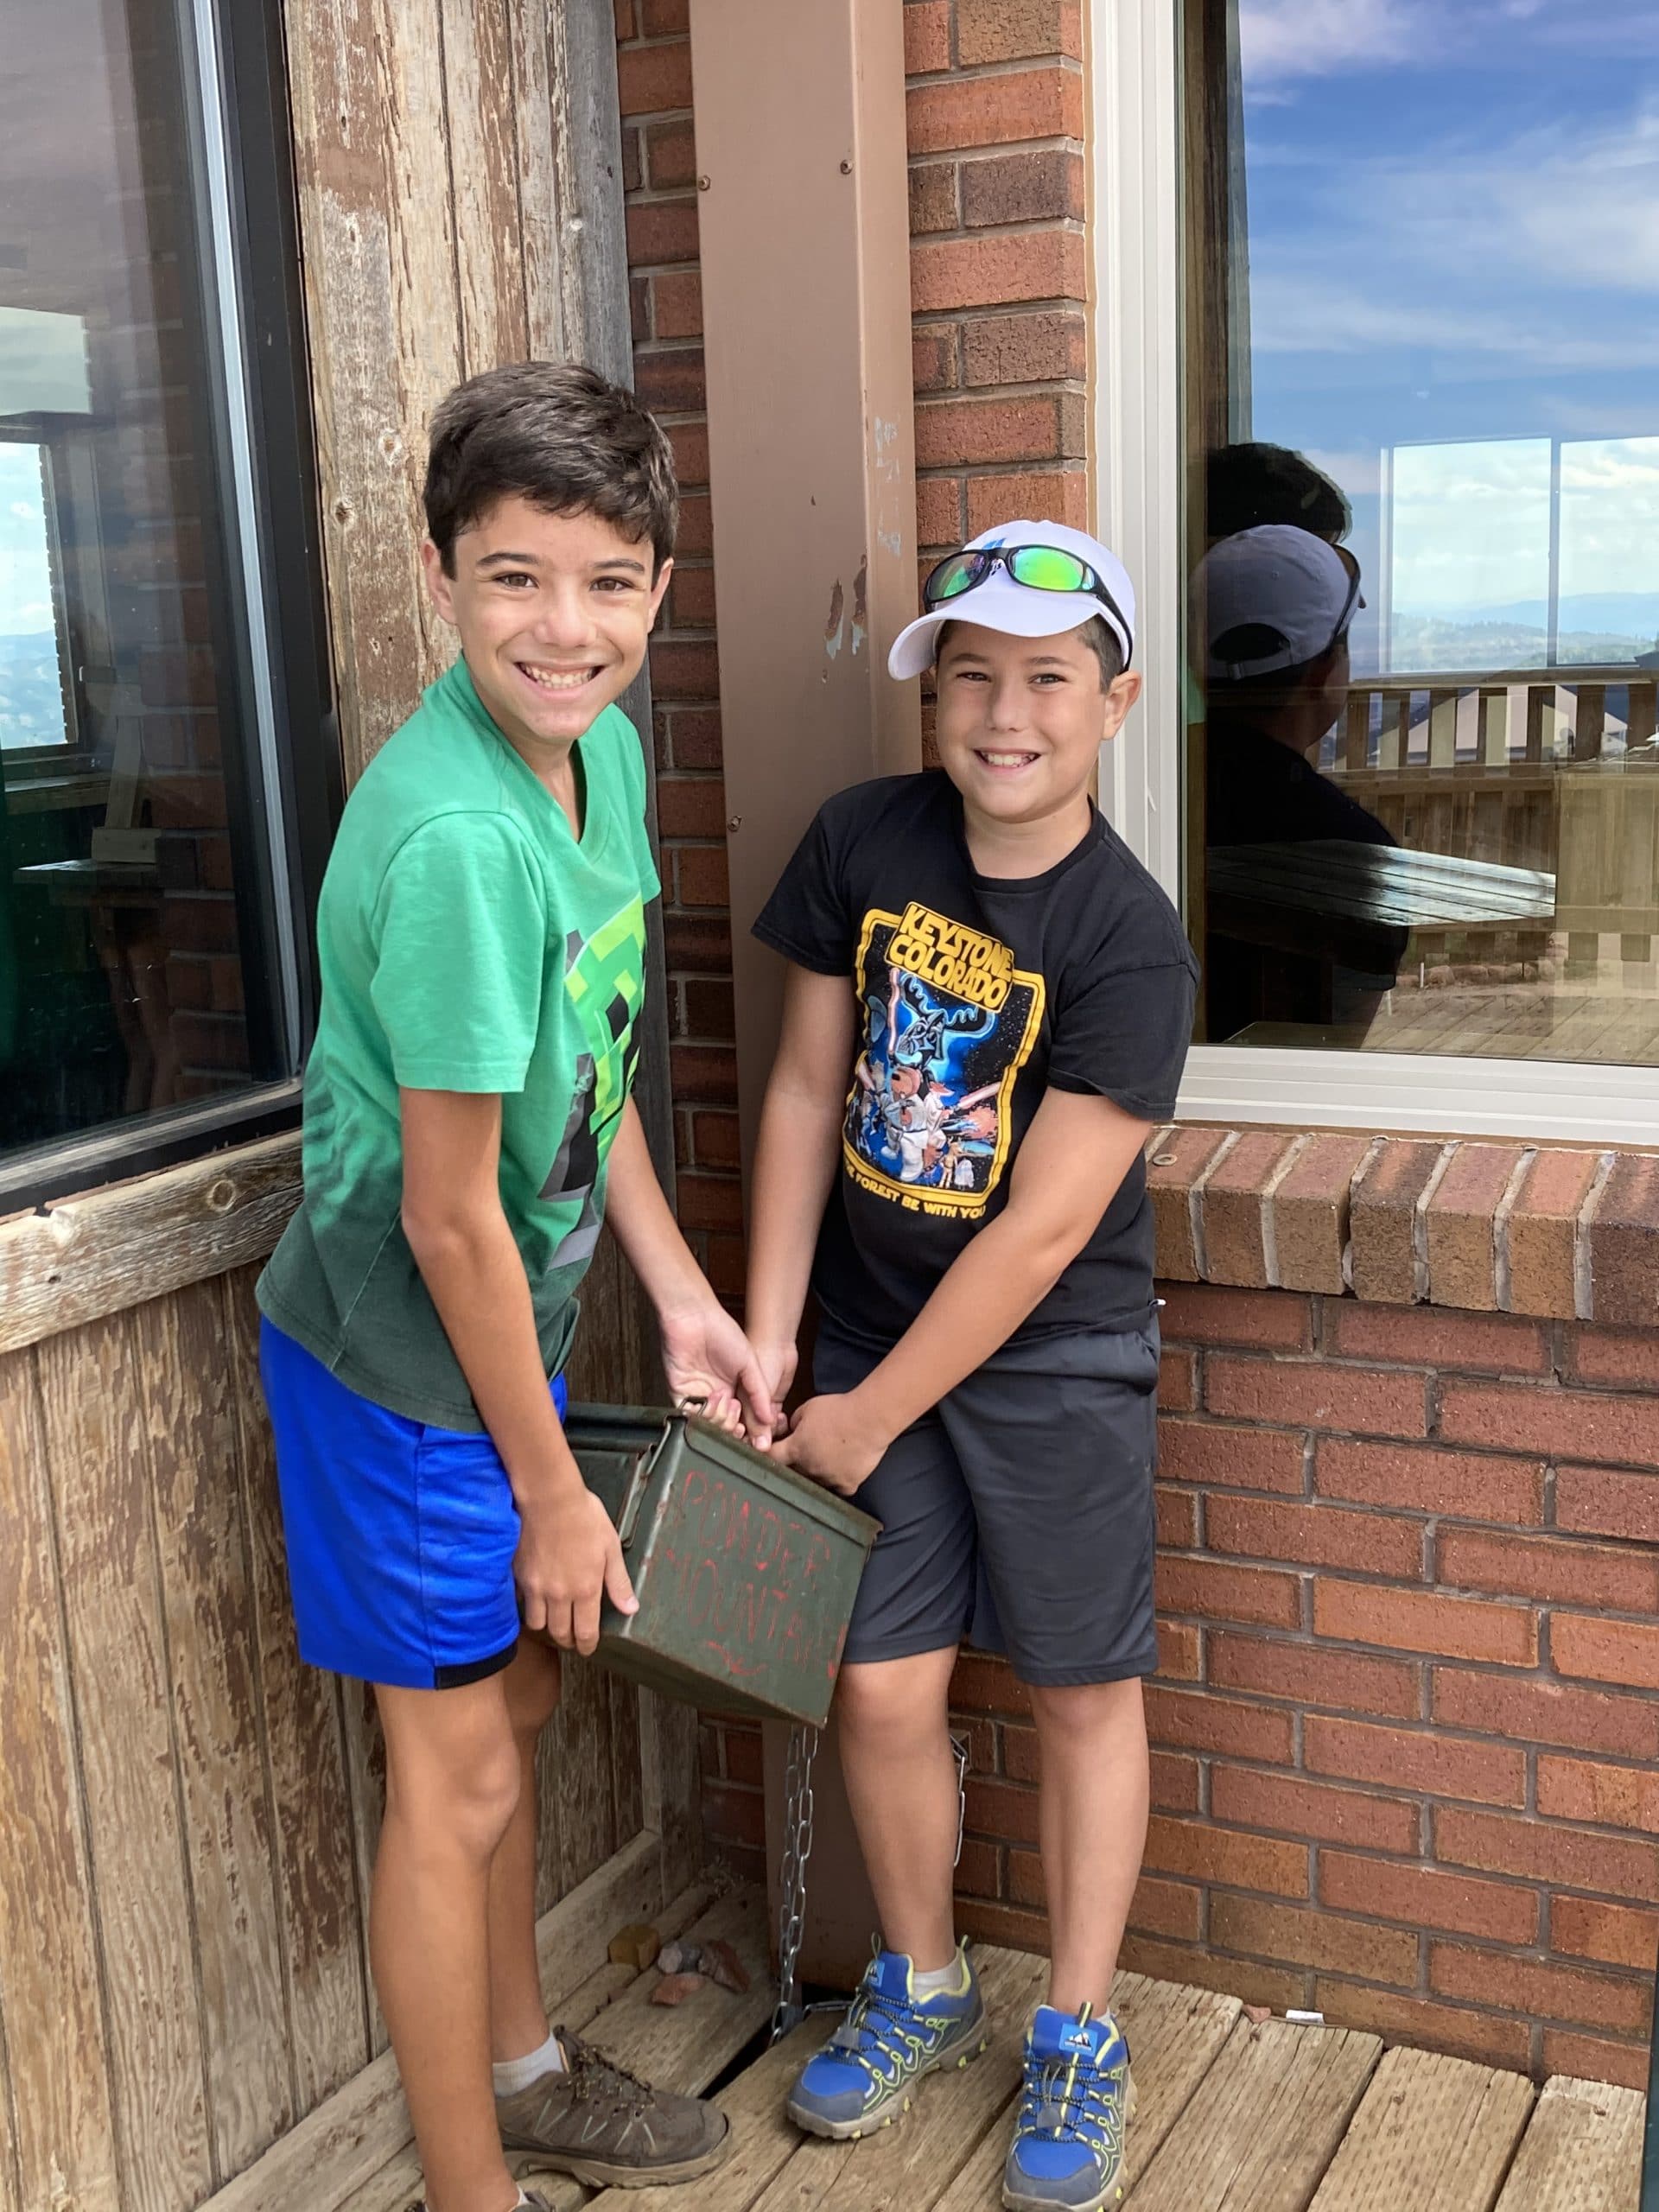 The boys were so excited to find their first geocache.